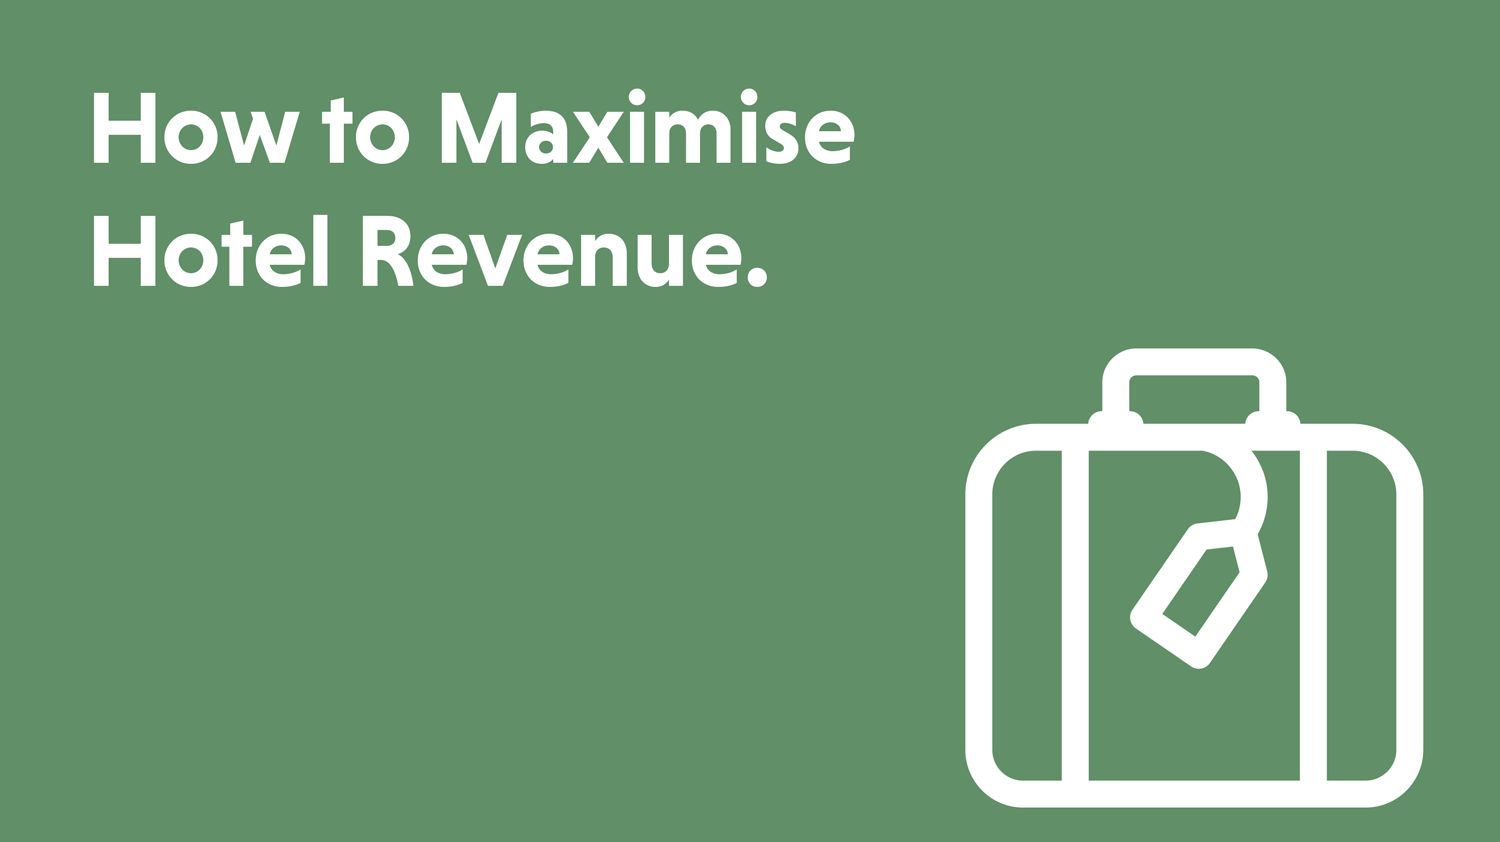 Blog cover artwork showing the title How to Maximise Hotel Revenue